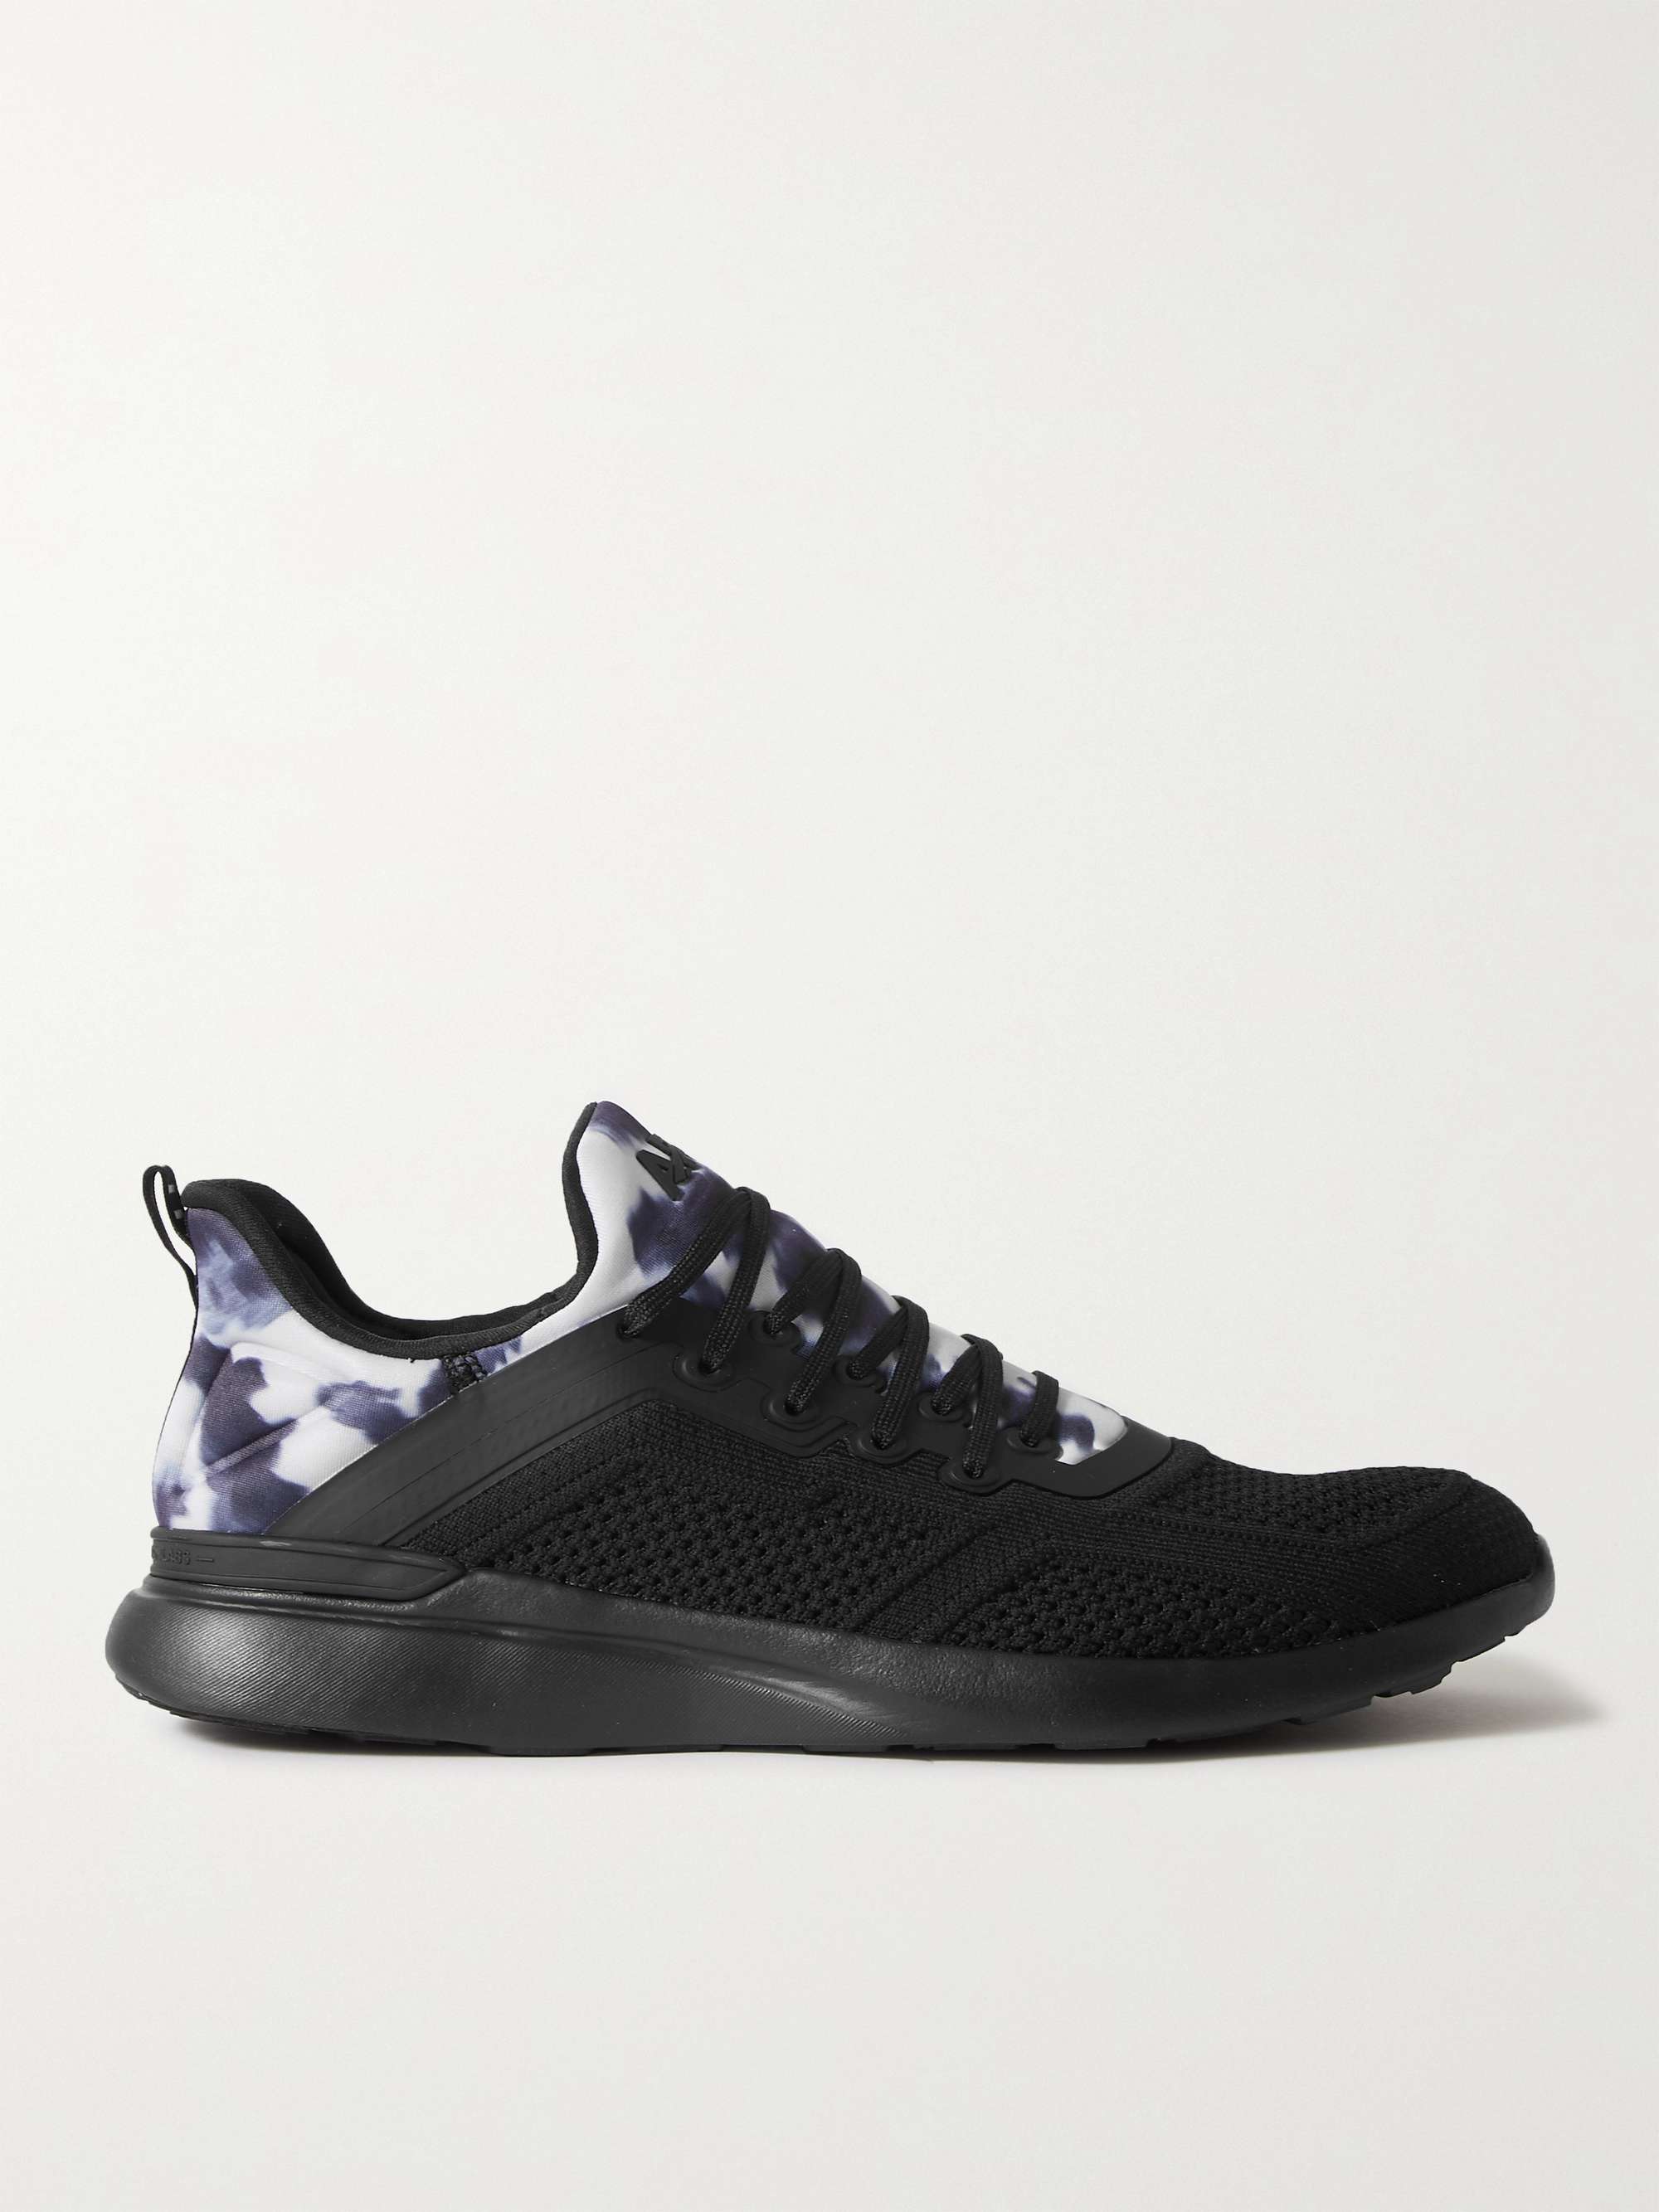 APL ATHLETIC PROPULSION LABS Tracer TechLoom Running Sneakers